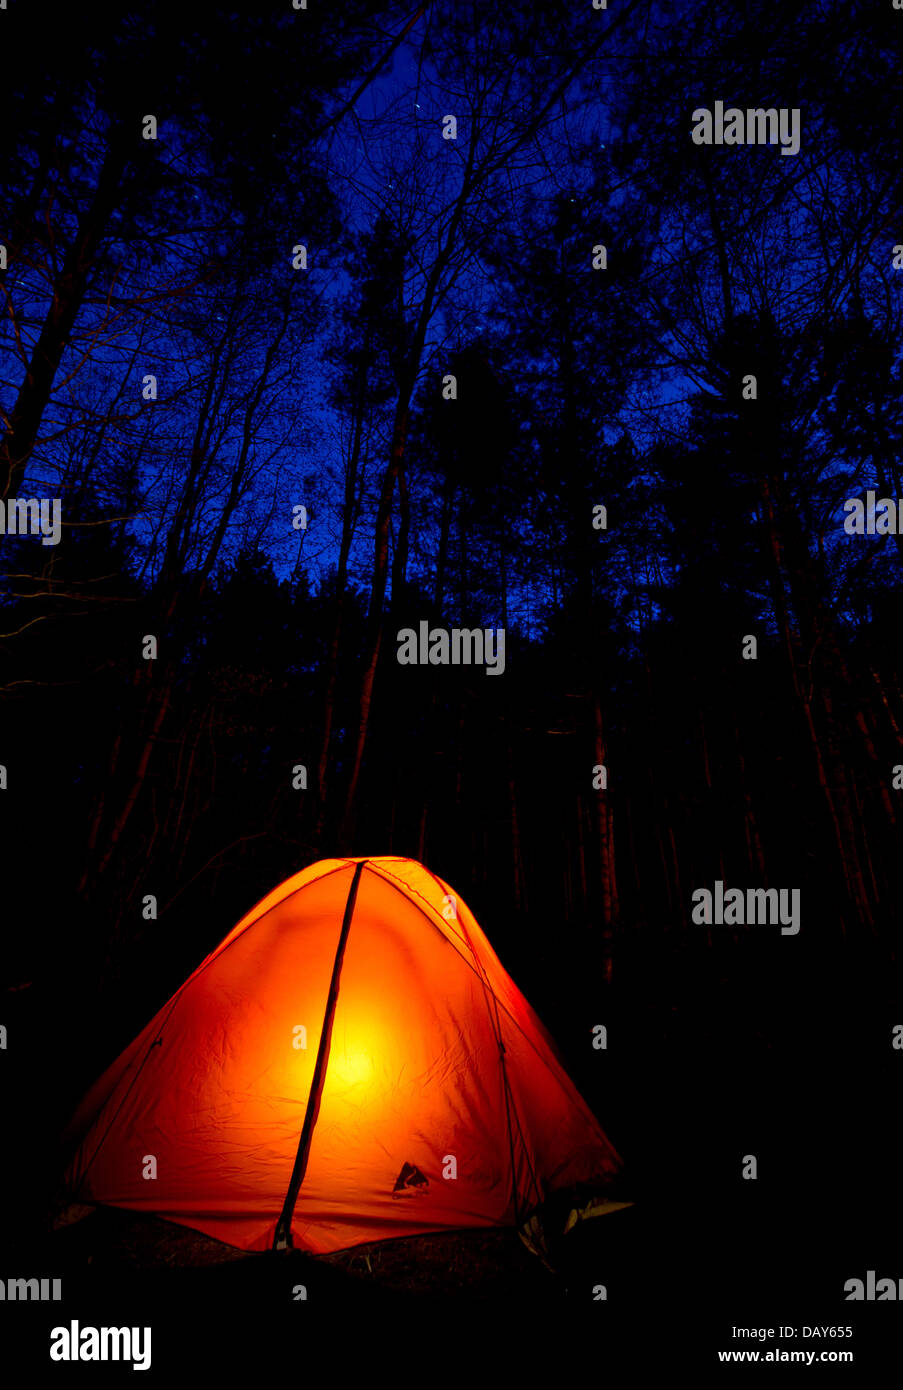 A glowing tent under the night sky Stock Photo